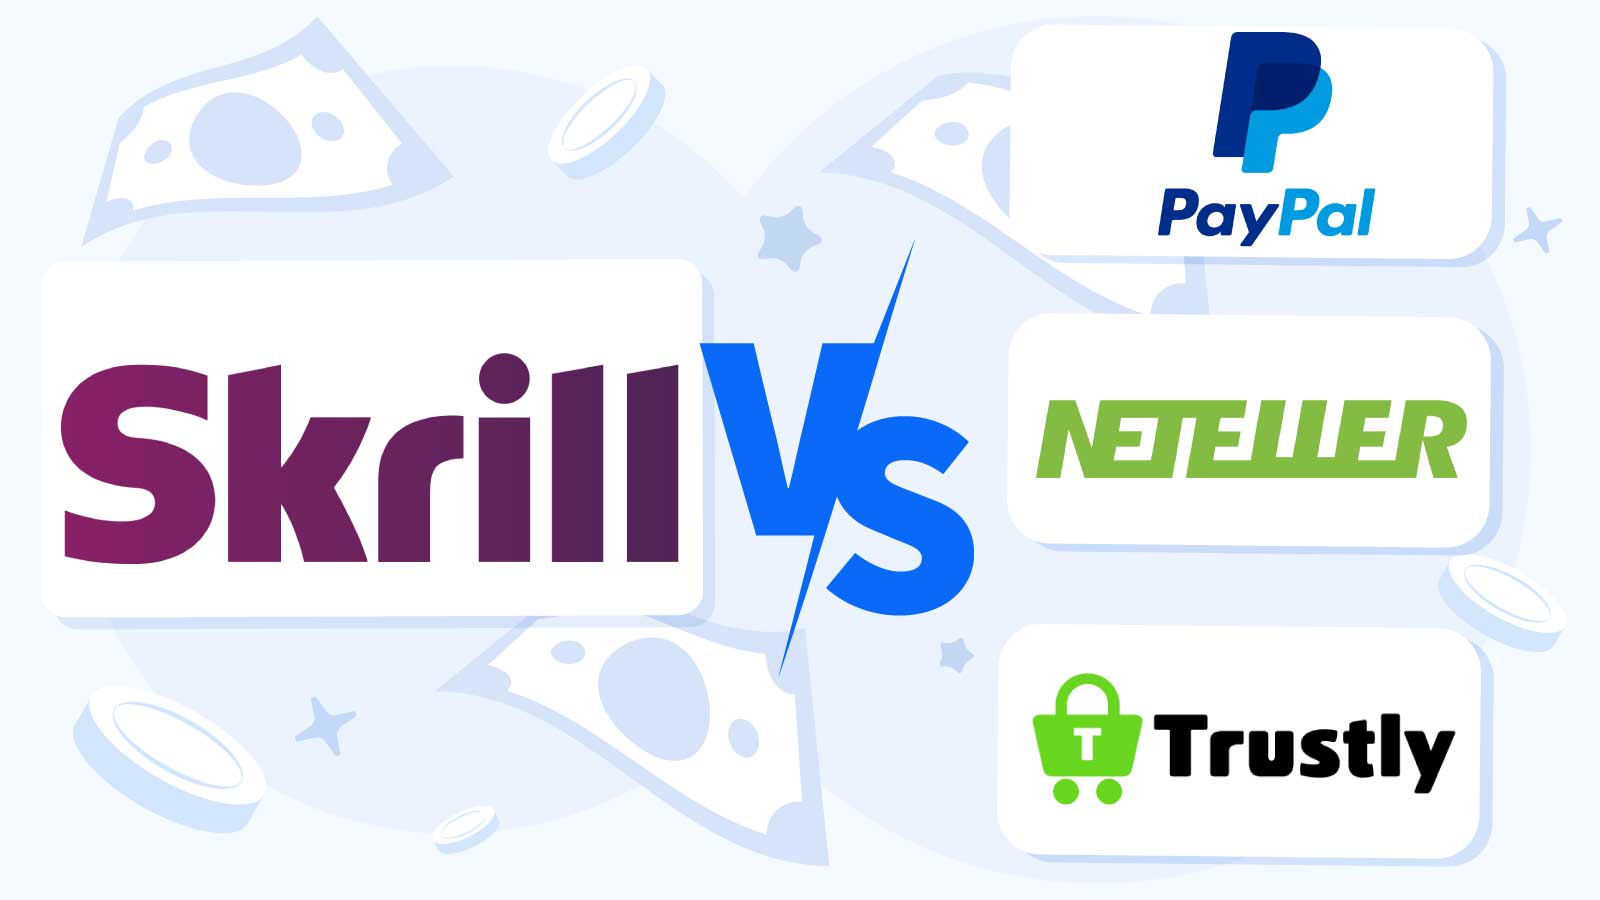 Our Alternatives for Skrill Casino Payments